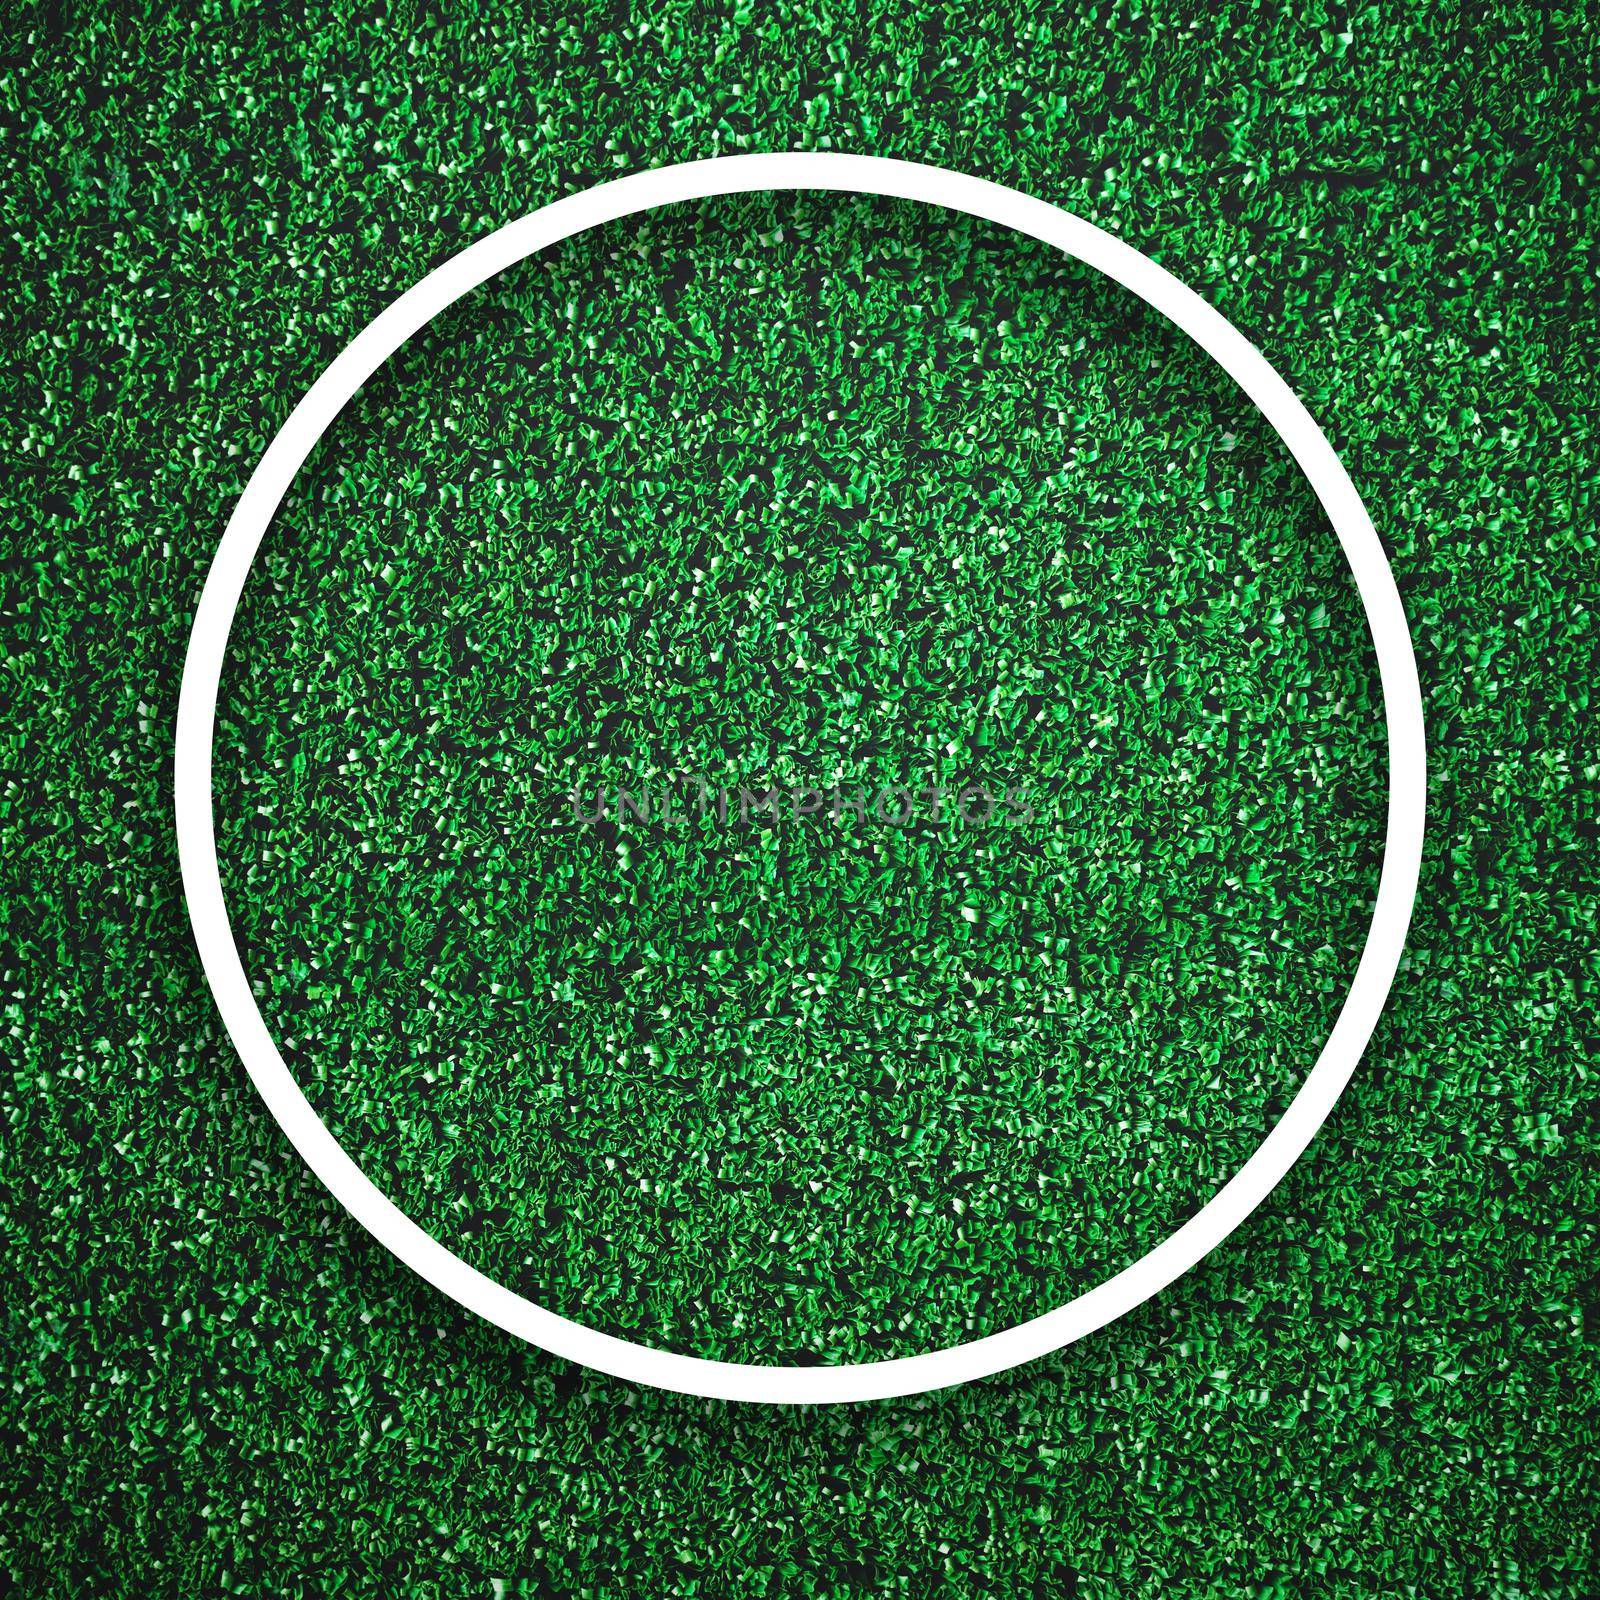 Circular white frame edge on green grass with shadow background. Decoration background element concept. Copy space for text insert in filled in black space.